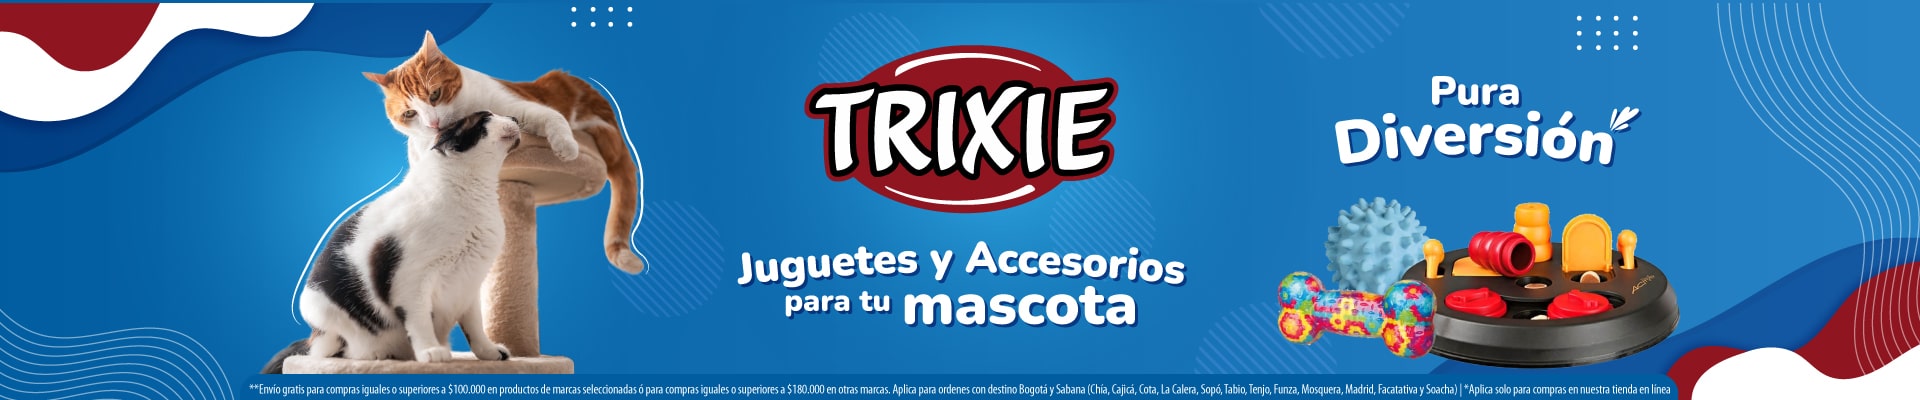 Trixie - Agrocampo 